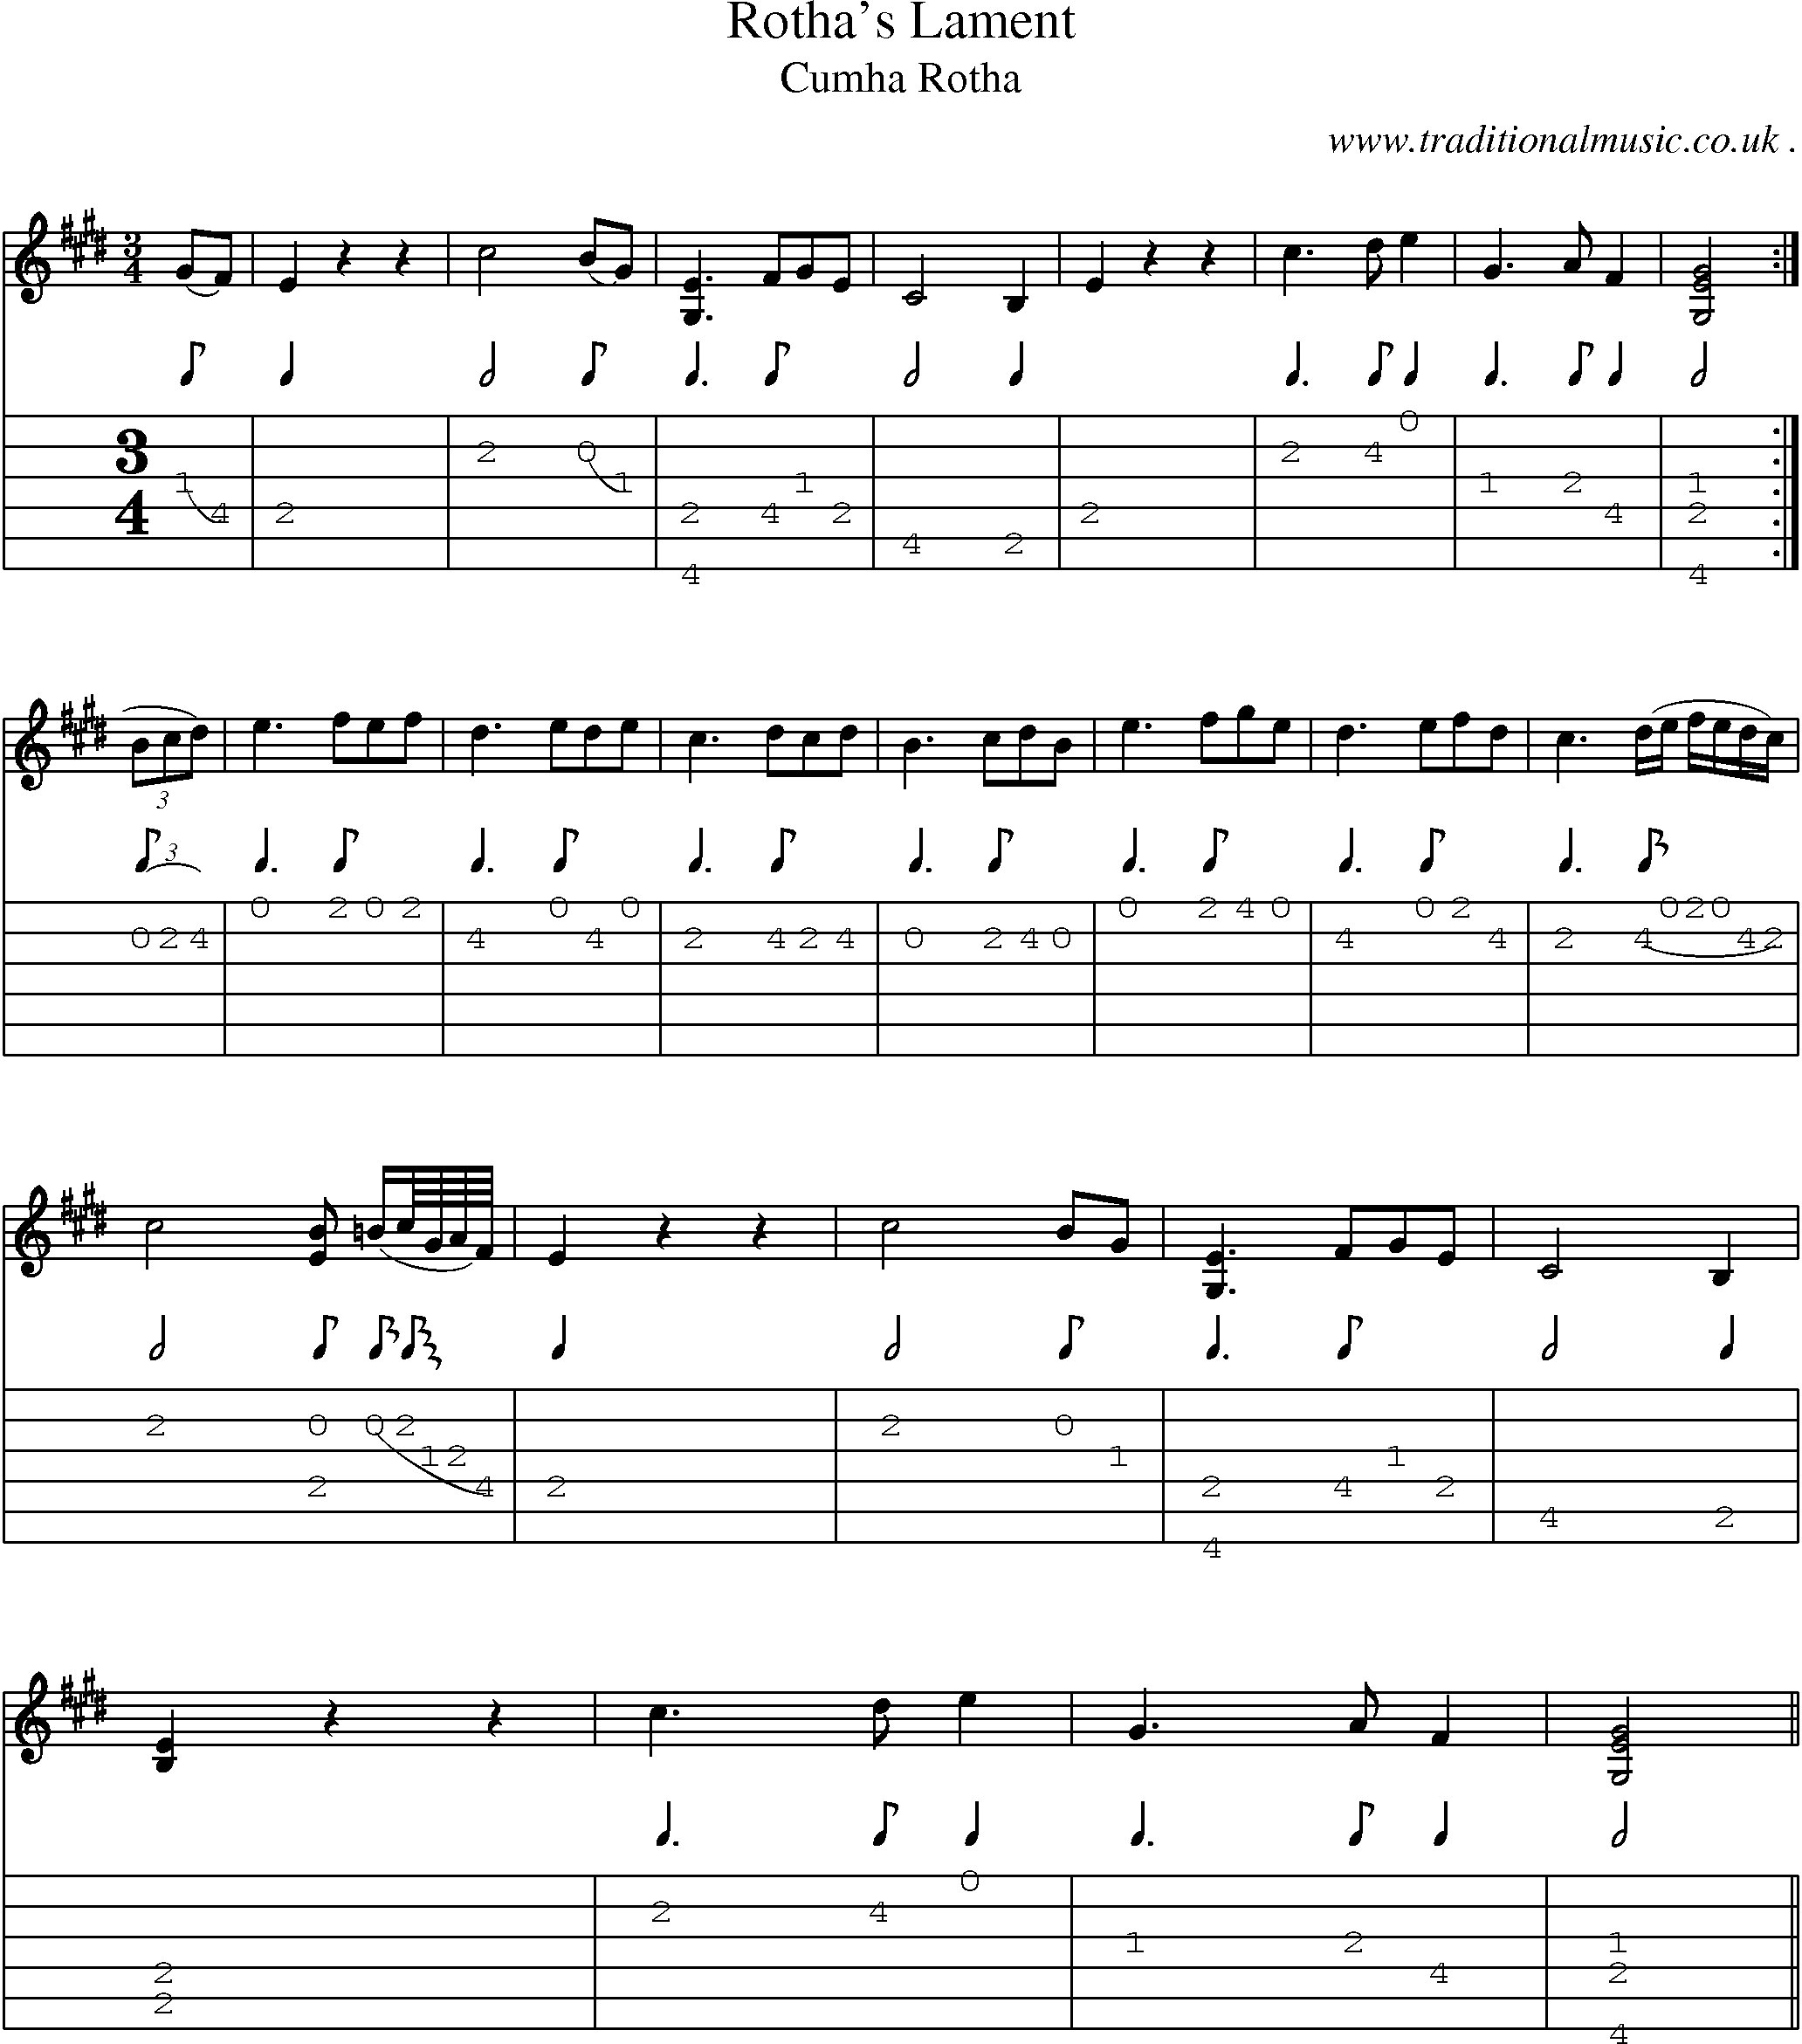 Sheet-music  score, Chords and Guitar Tabs for Rothas Lament